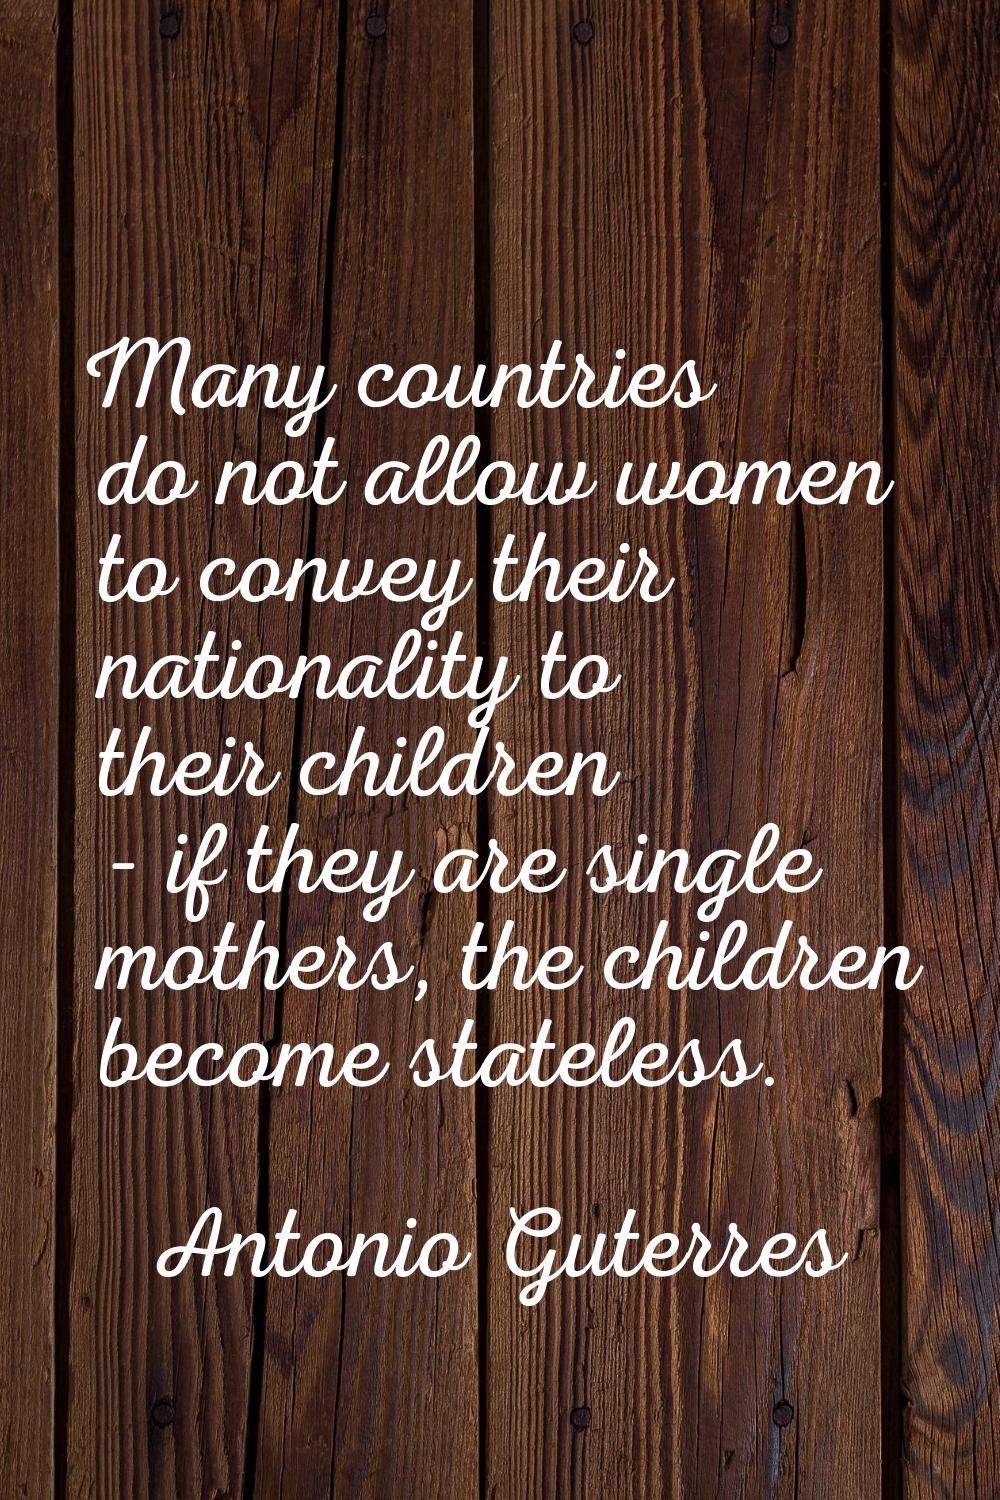 Many countries do not allow women to convey their nationality to their children - if they are singl